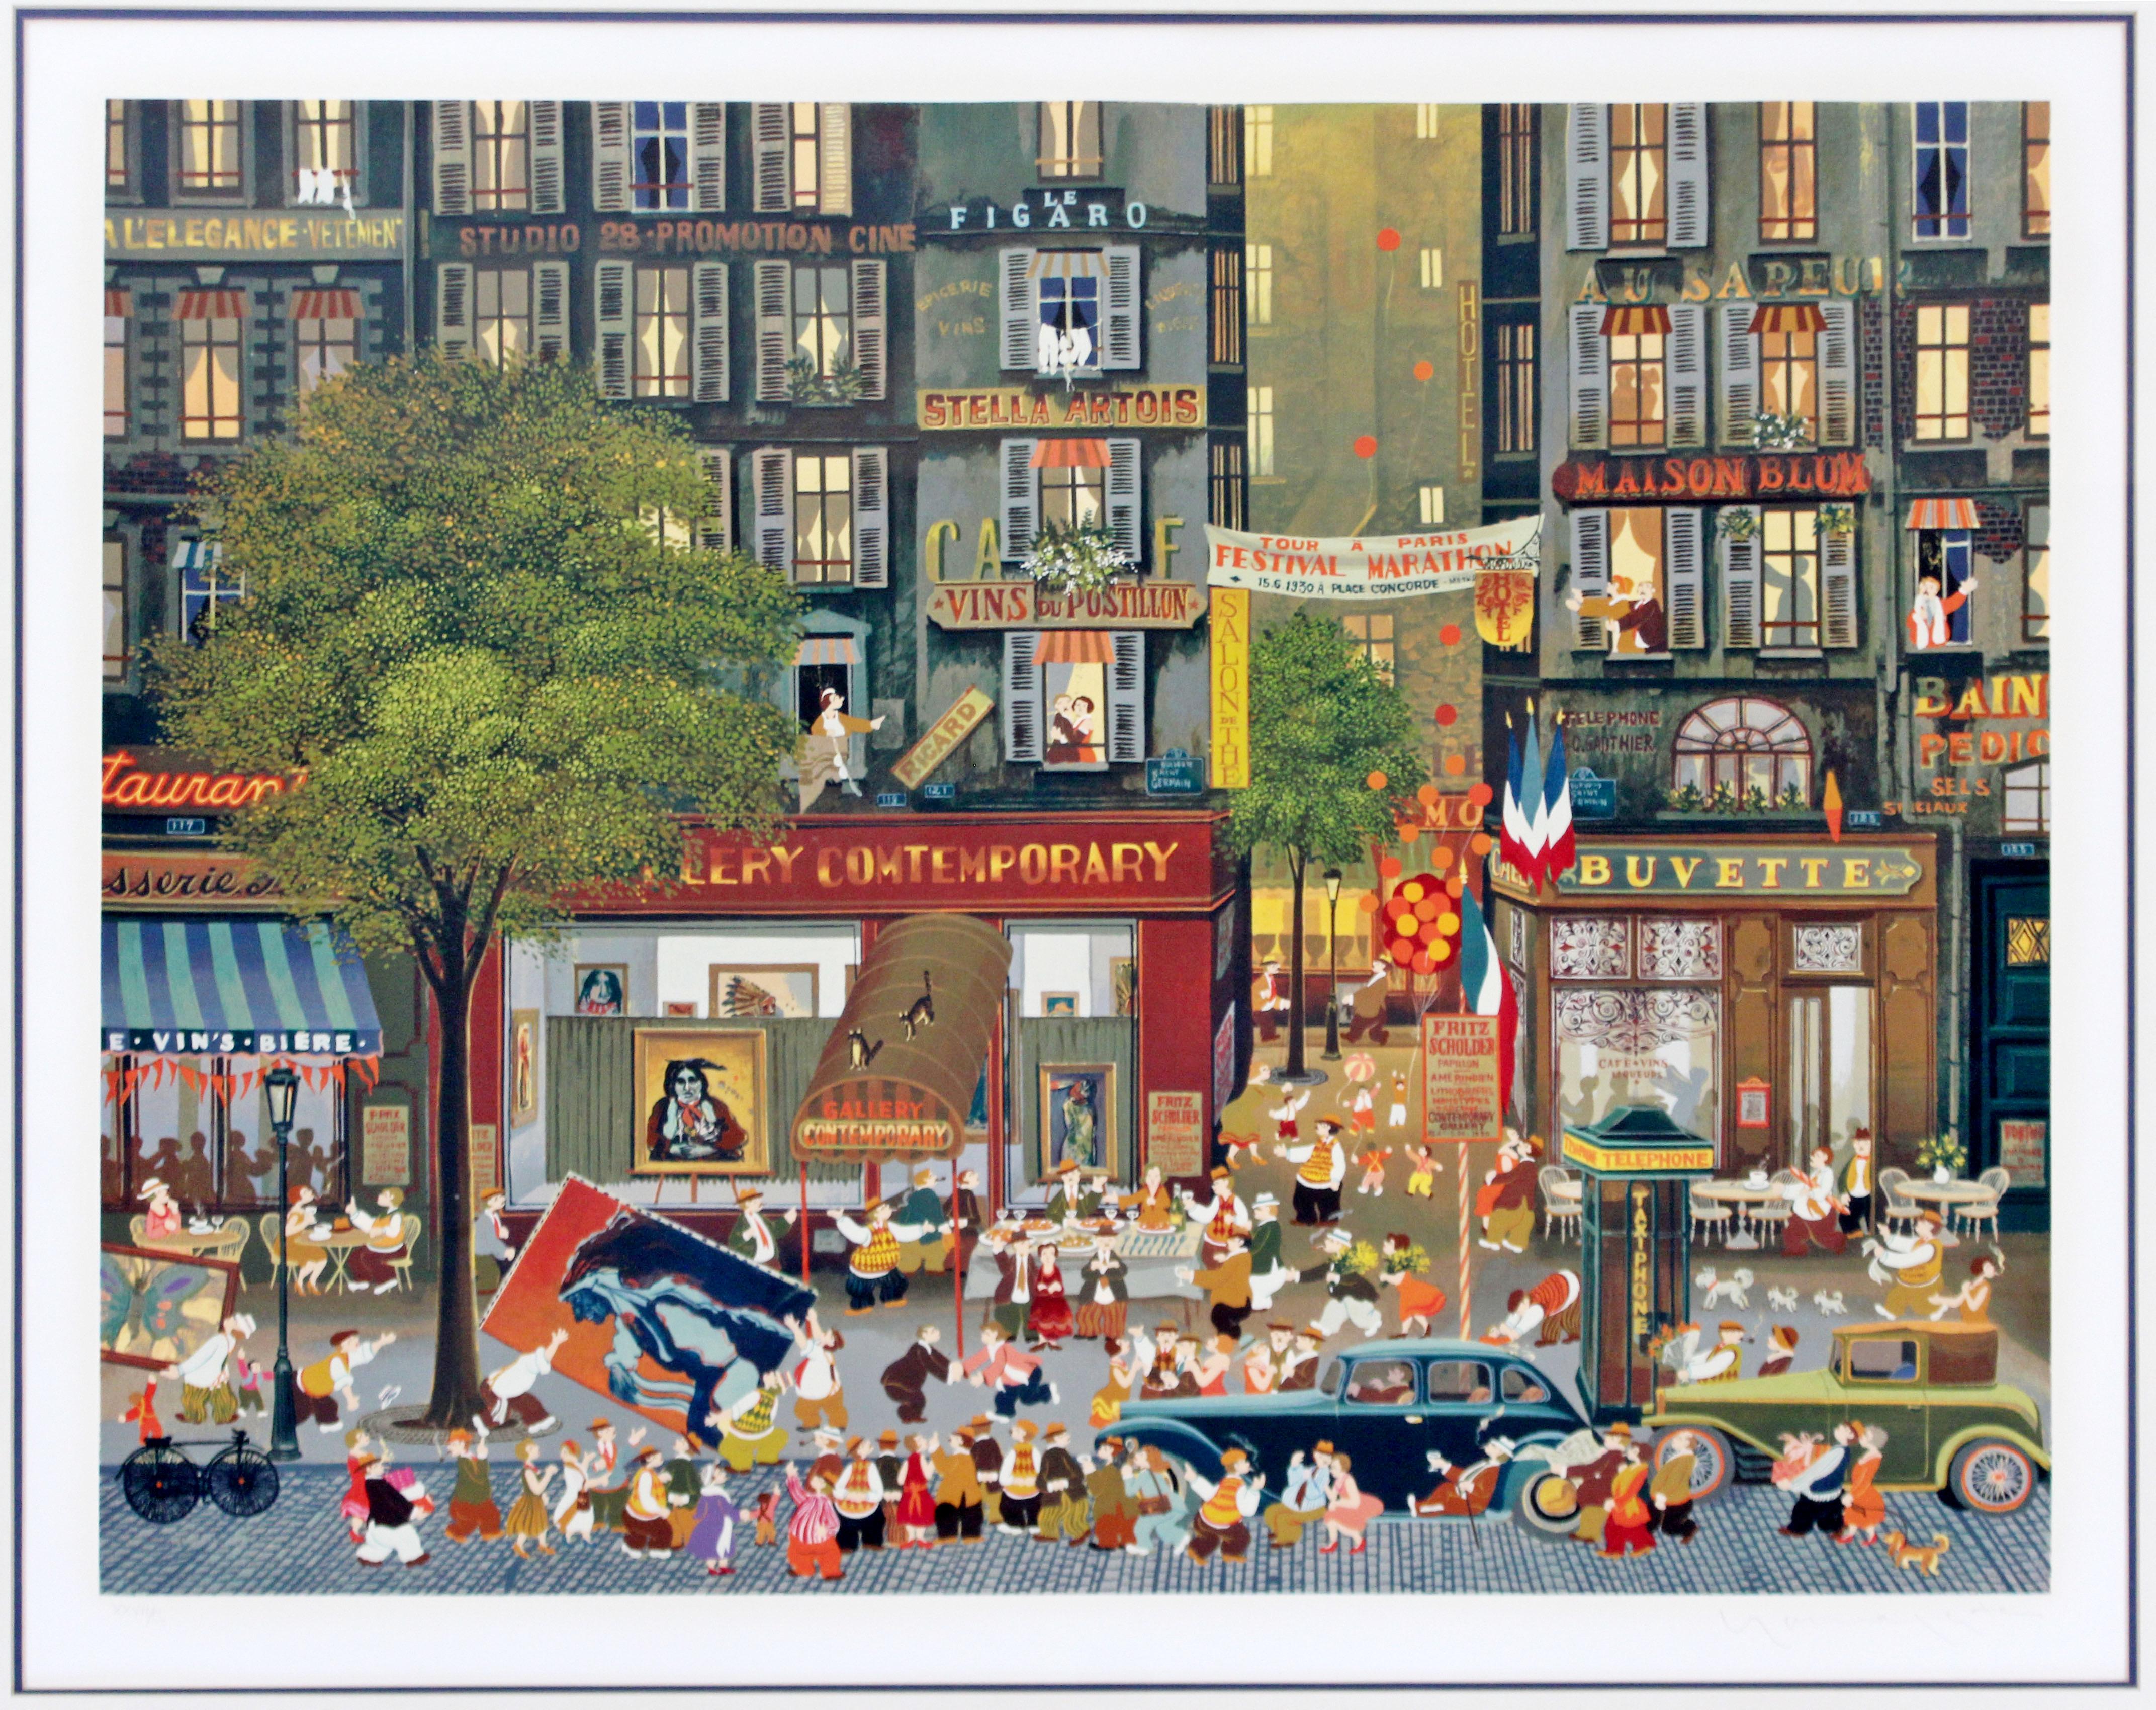 For your consideration is a framed lithograph, signed and numbered by Hiro Yamagata, 27/100. In excellent condition, despite a small watermark on the bottom. The dimensions of the frame are 41.5